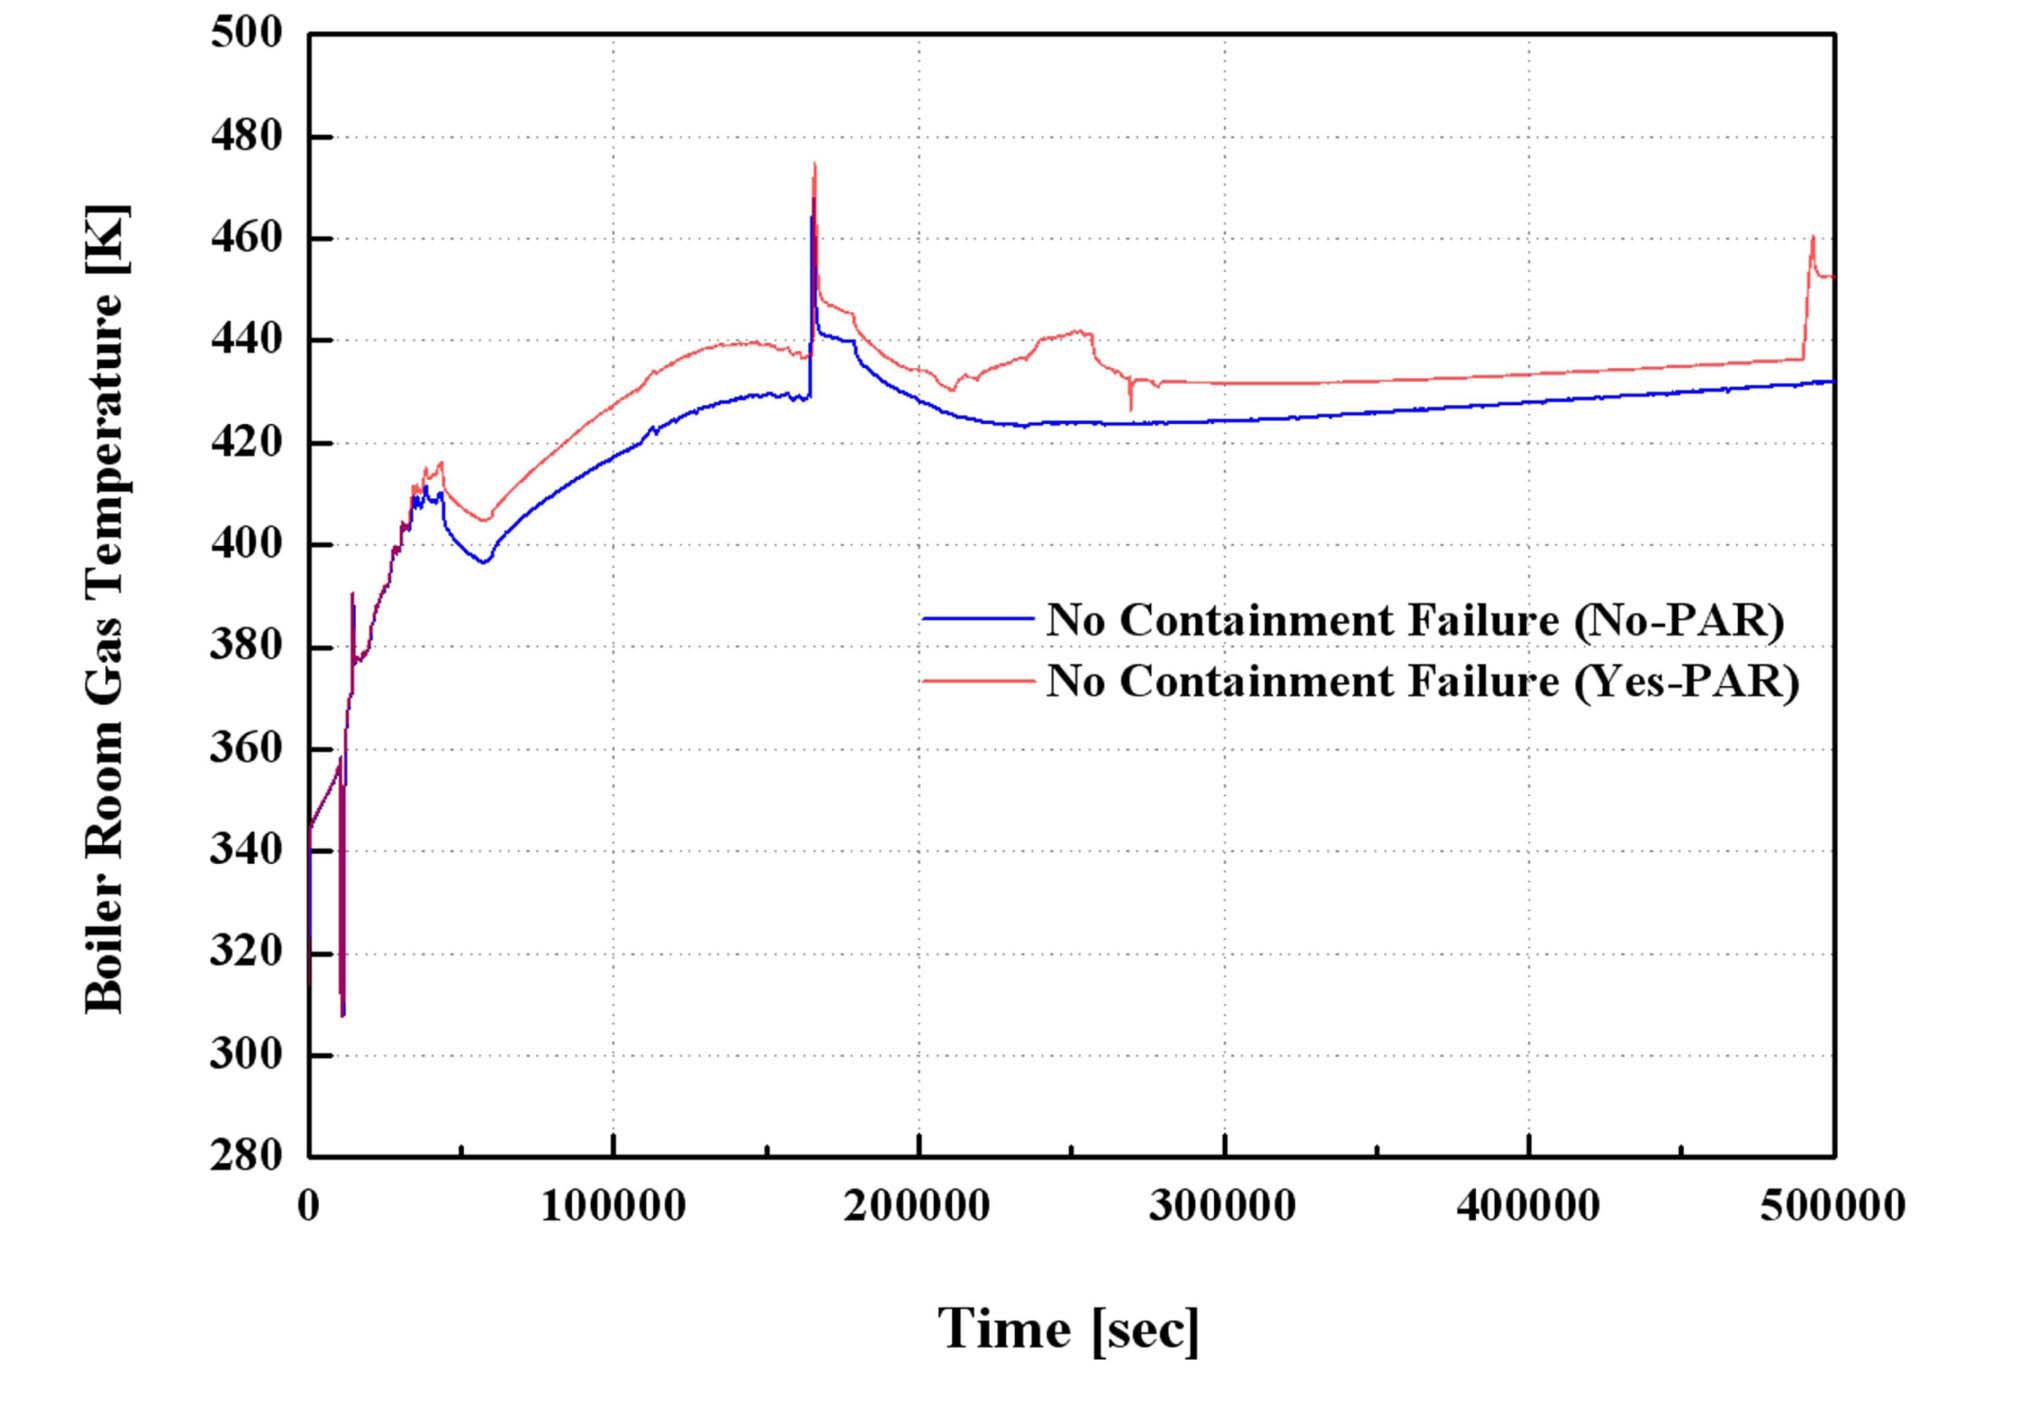 Temperature Behavior of Gas Inside RB
(‘SBO-noCFV’ Case with ‘no RB Fail’)